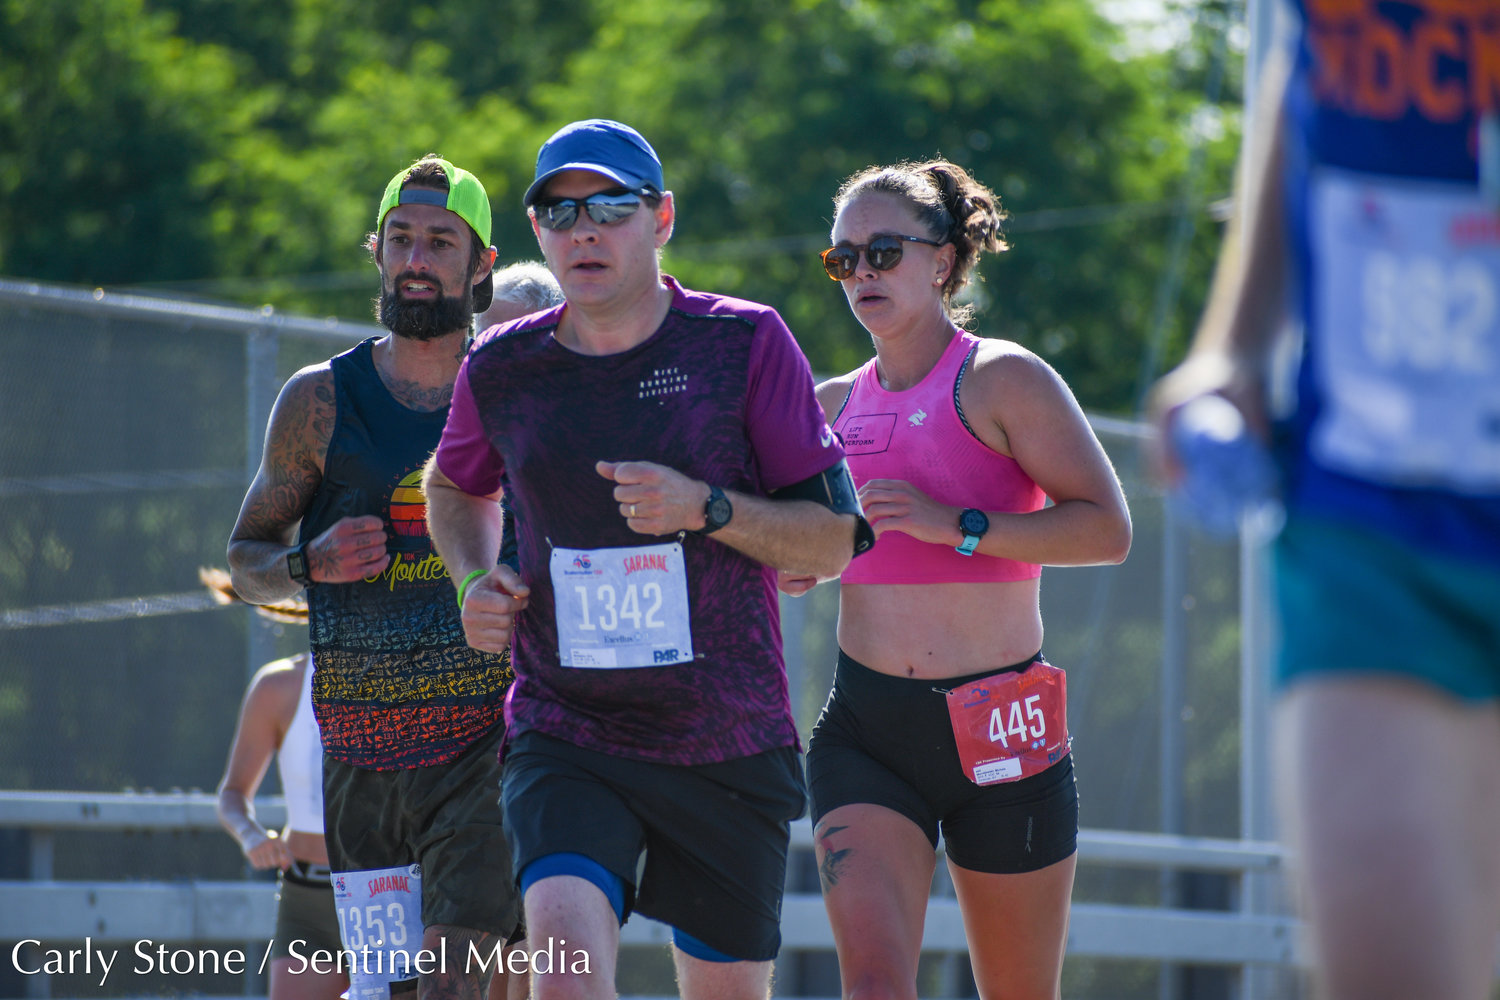 Competitors in the 45th Boilermaker Road Race made their way over Burrstone Road bridge as they approached the finish line over three miles away.